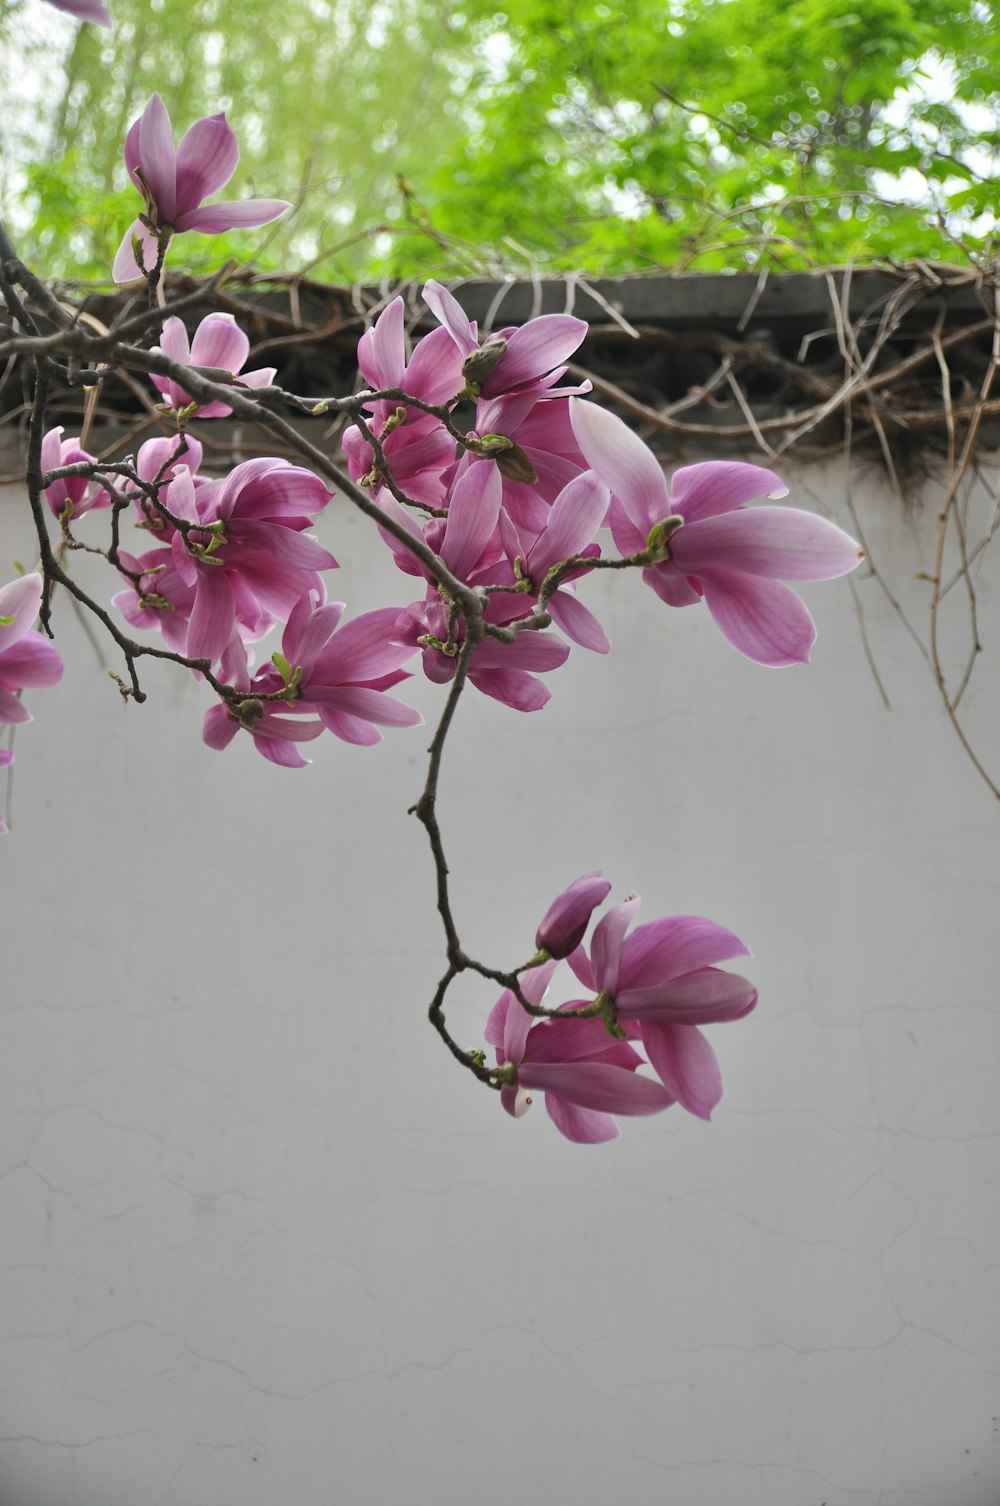 a branch with pink flowers hanging from it